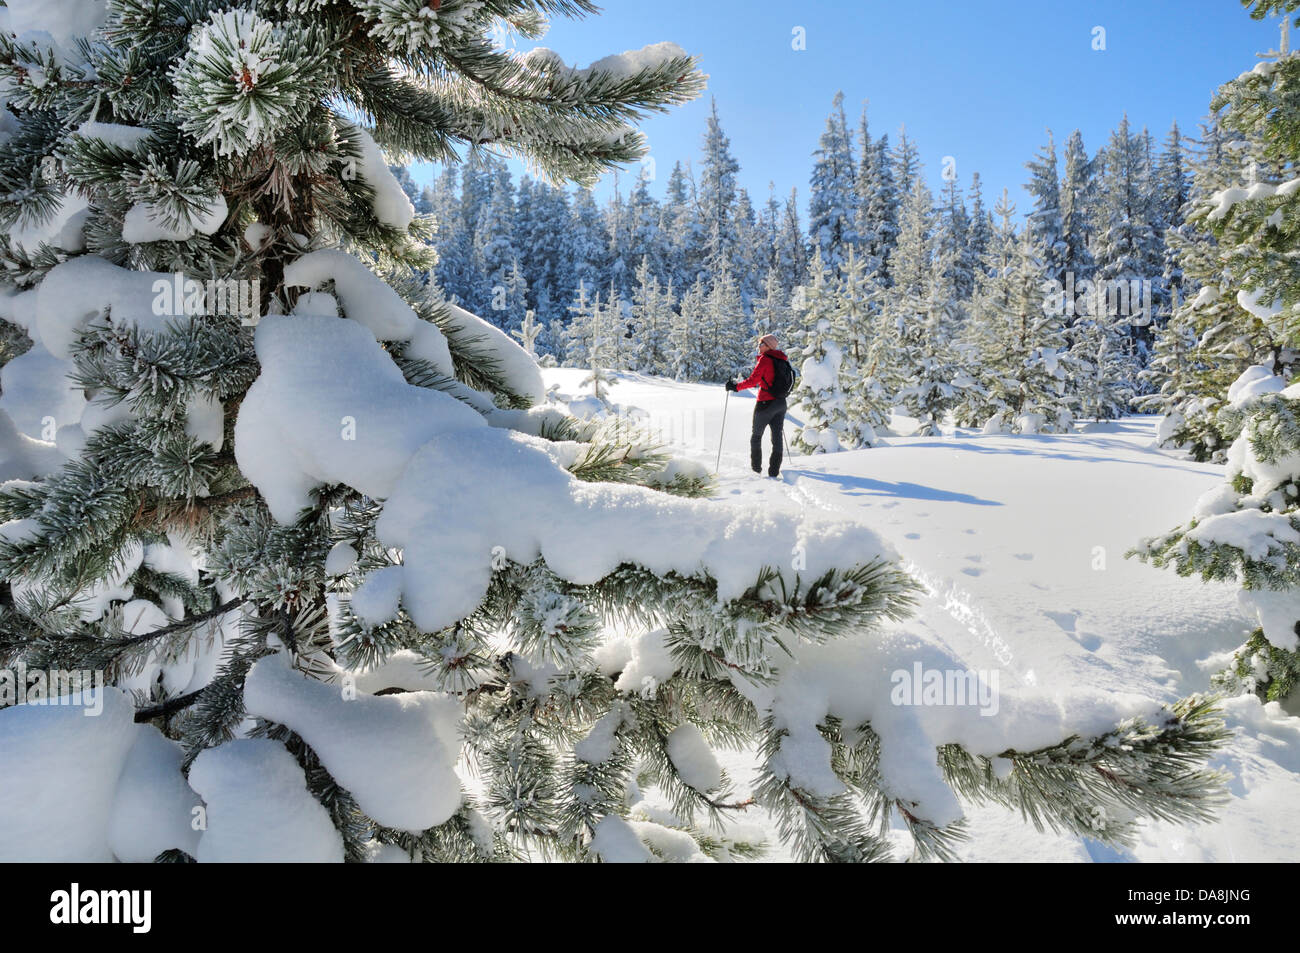 USA, United States, America, Oregon, Bend, North America, Deschutes, County, Cascades mountains, National Forest, winter, sport, Stock Photo